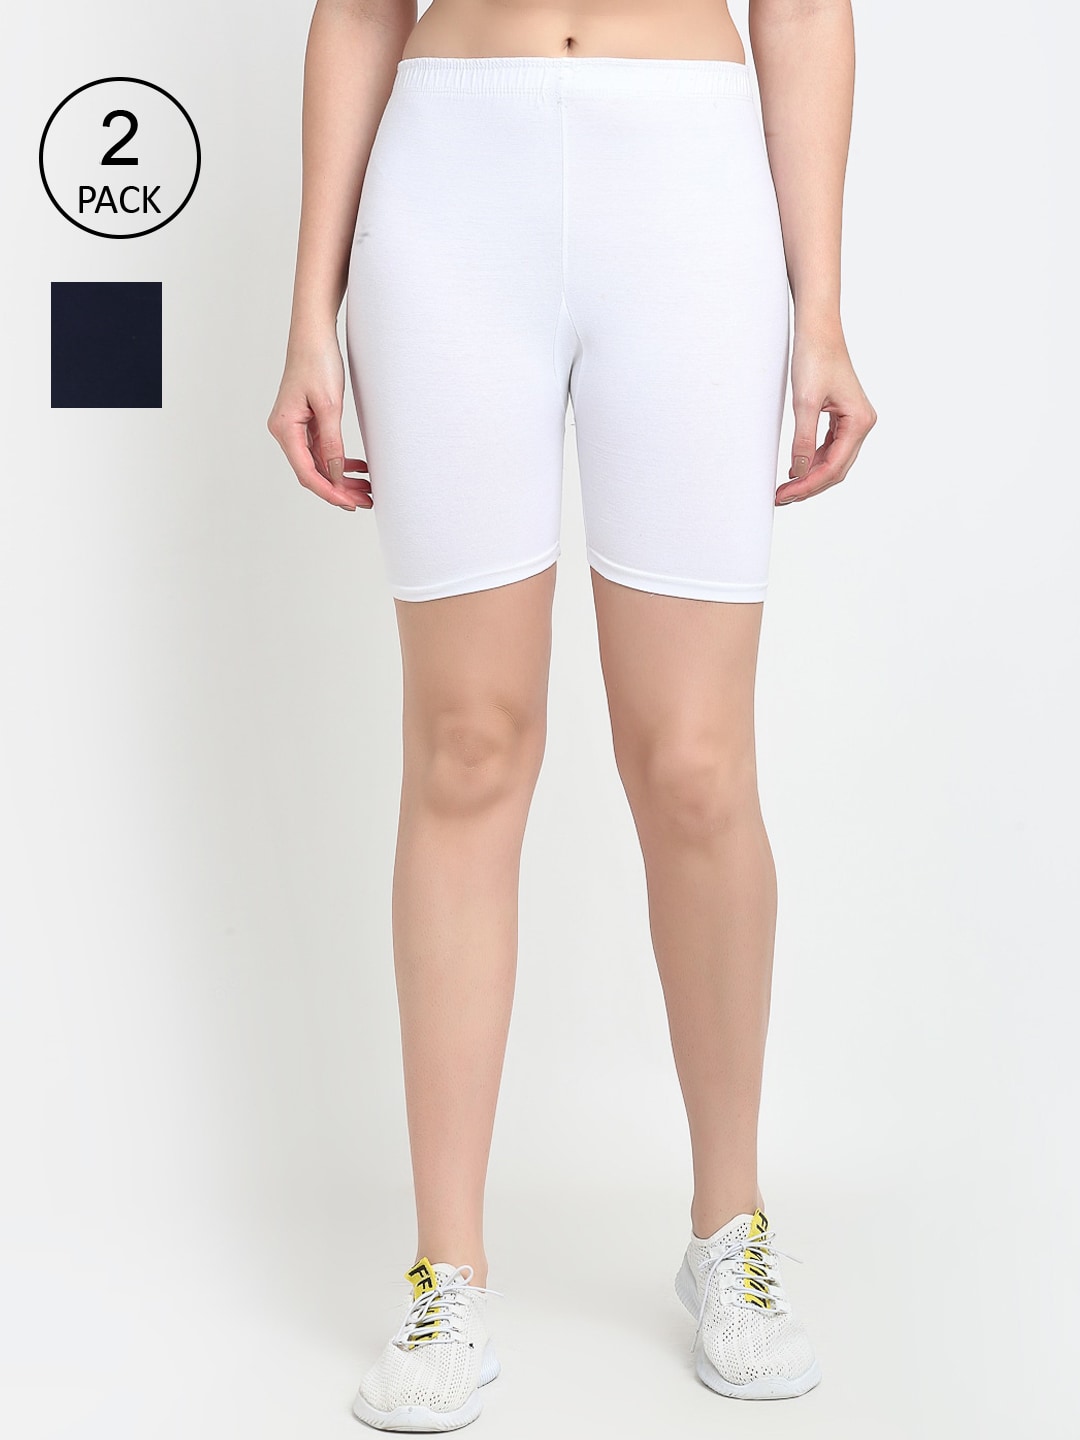 GRACIT Women White & Navy Blue Solid Cotton Cycling Shorts Price in India